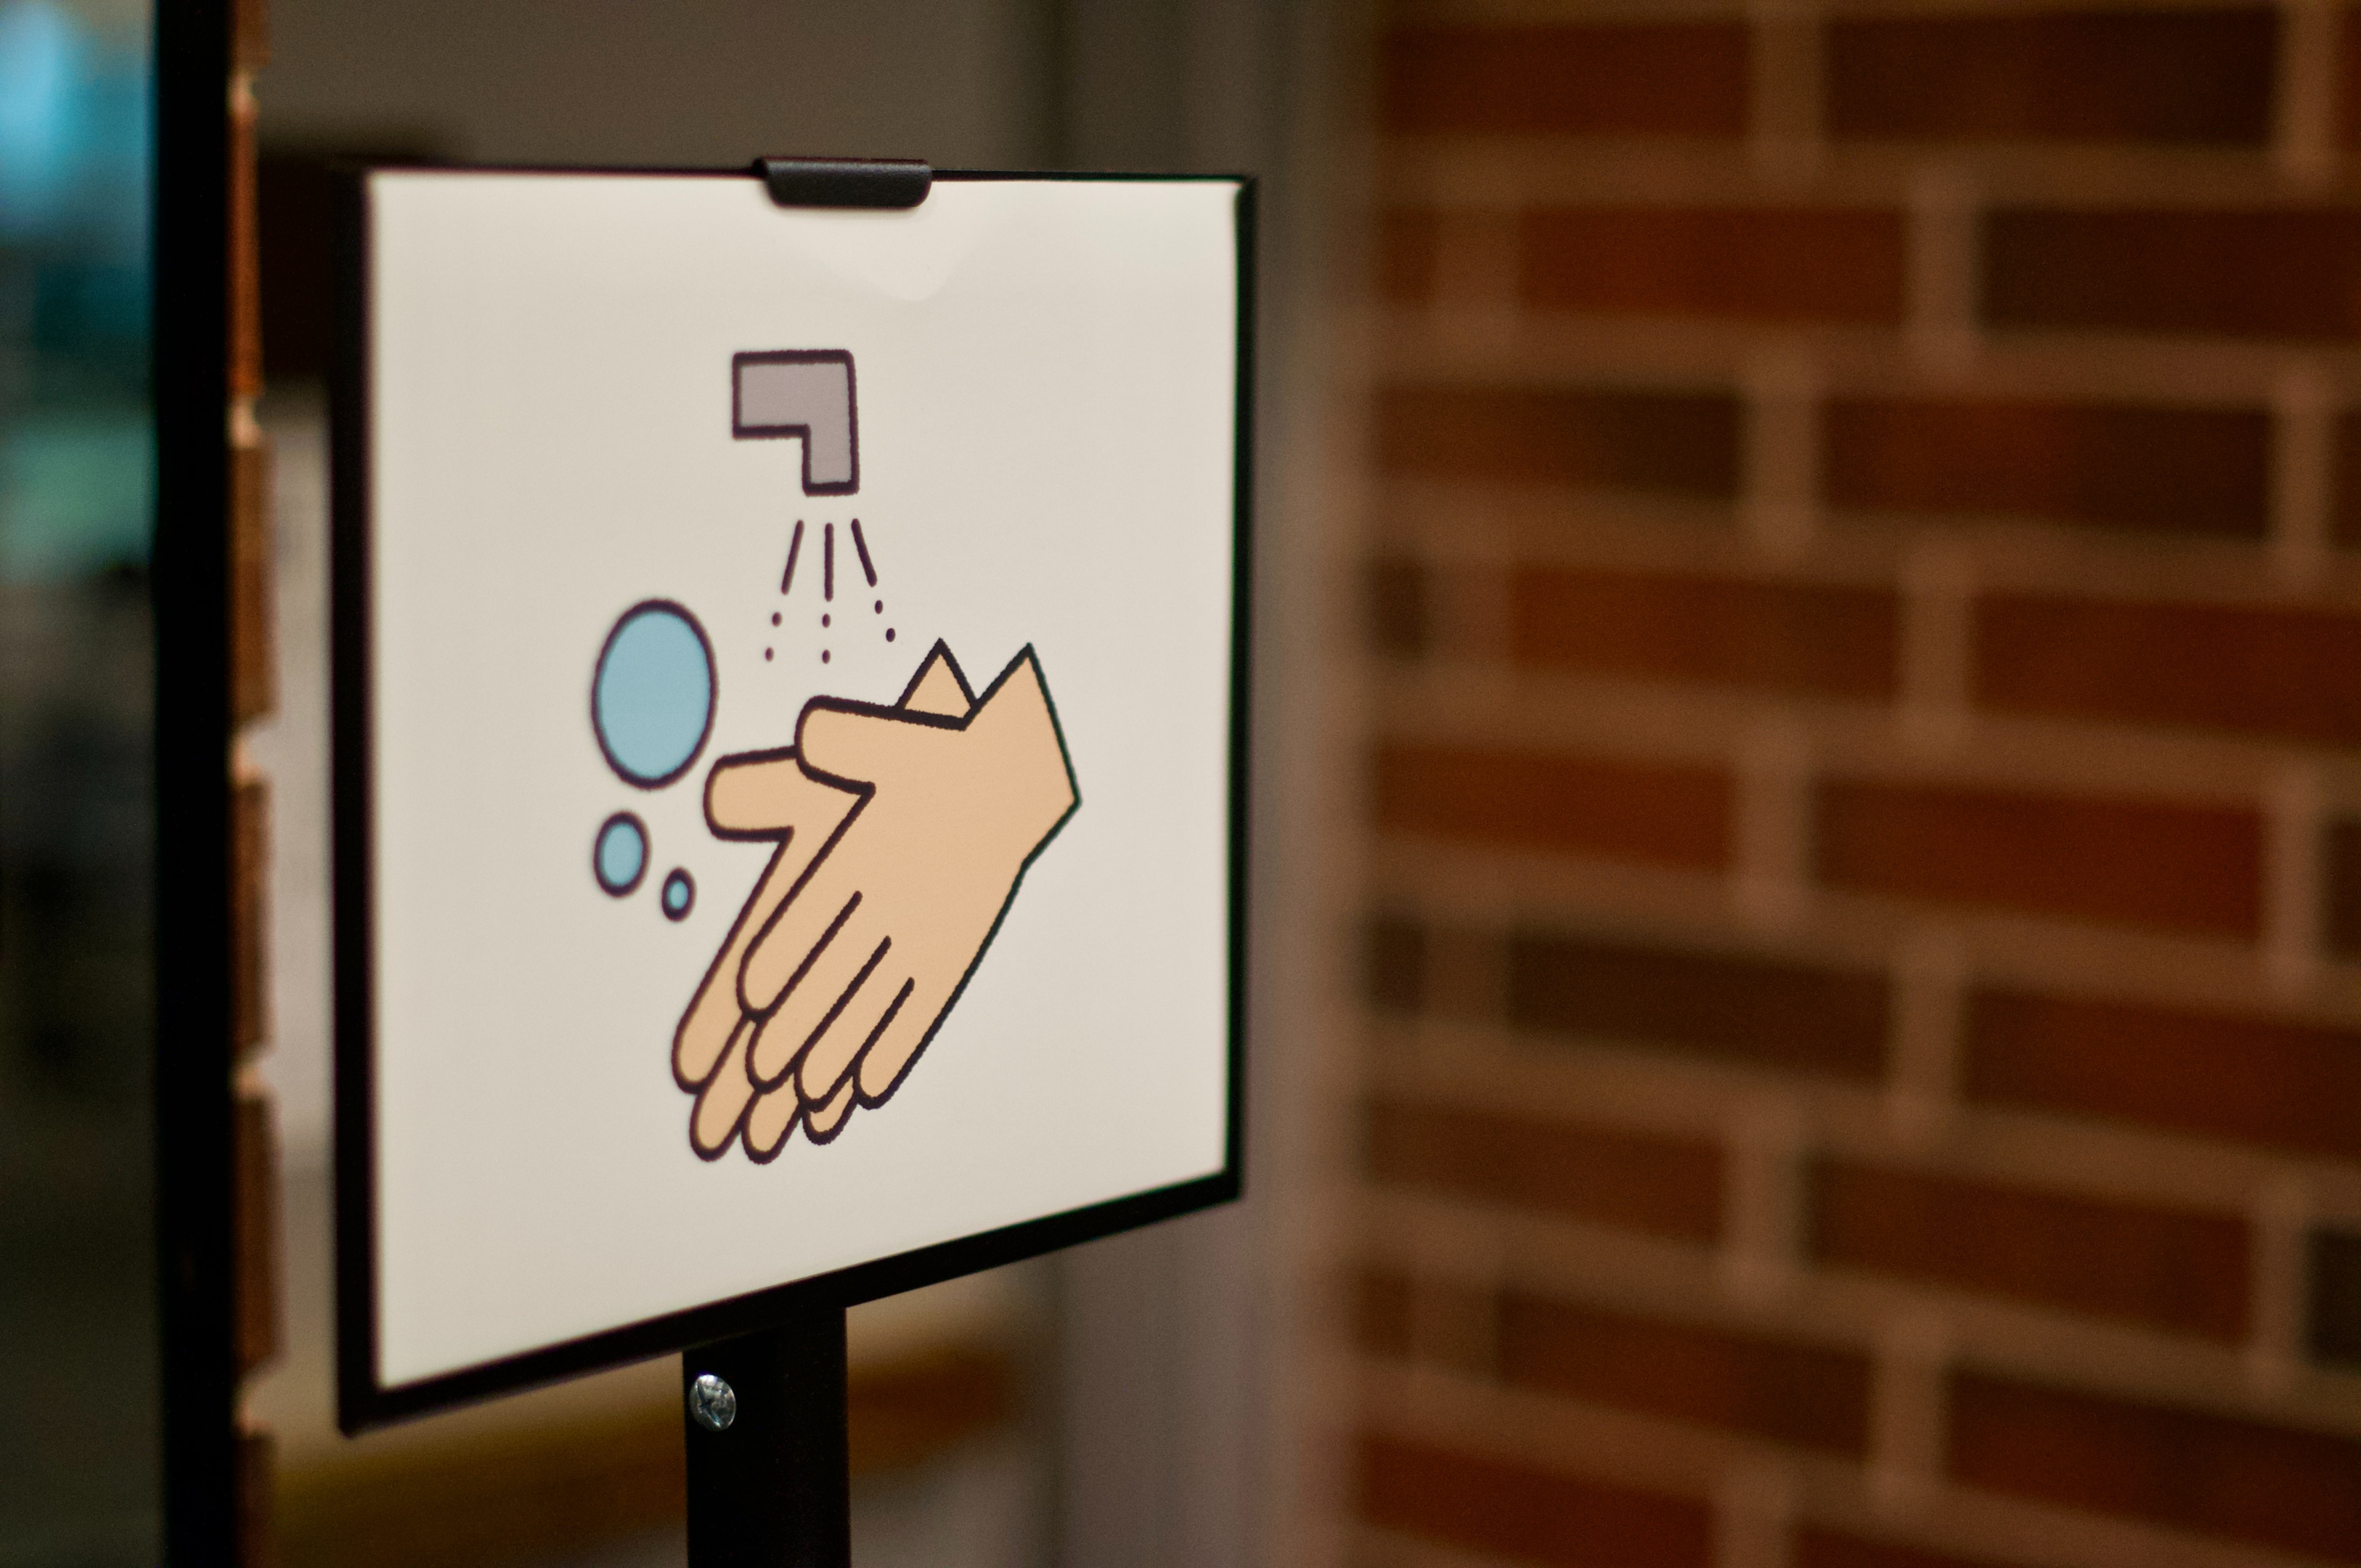 Face to Face Events Back on Track | Photo of a printed sign that features handwashing icon. | Image Link: https://images.unsplash.com/photo-1612125033189-3a4950acc118?ixlib=rb-1.2.1&ixid=MnwxMjA3fDB8MHxwaG90by1wYWdlfHx8fGVufDB8fHx8&auto=format&fit=crop&w=874&q=80